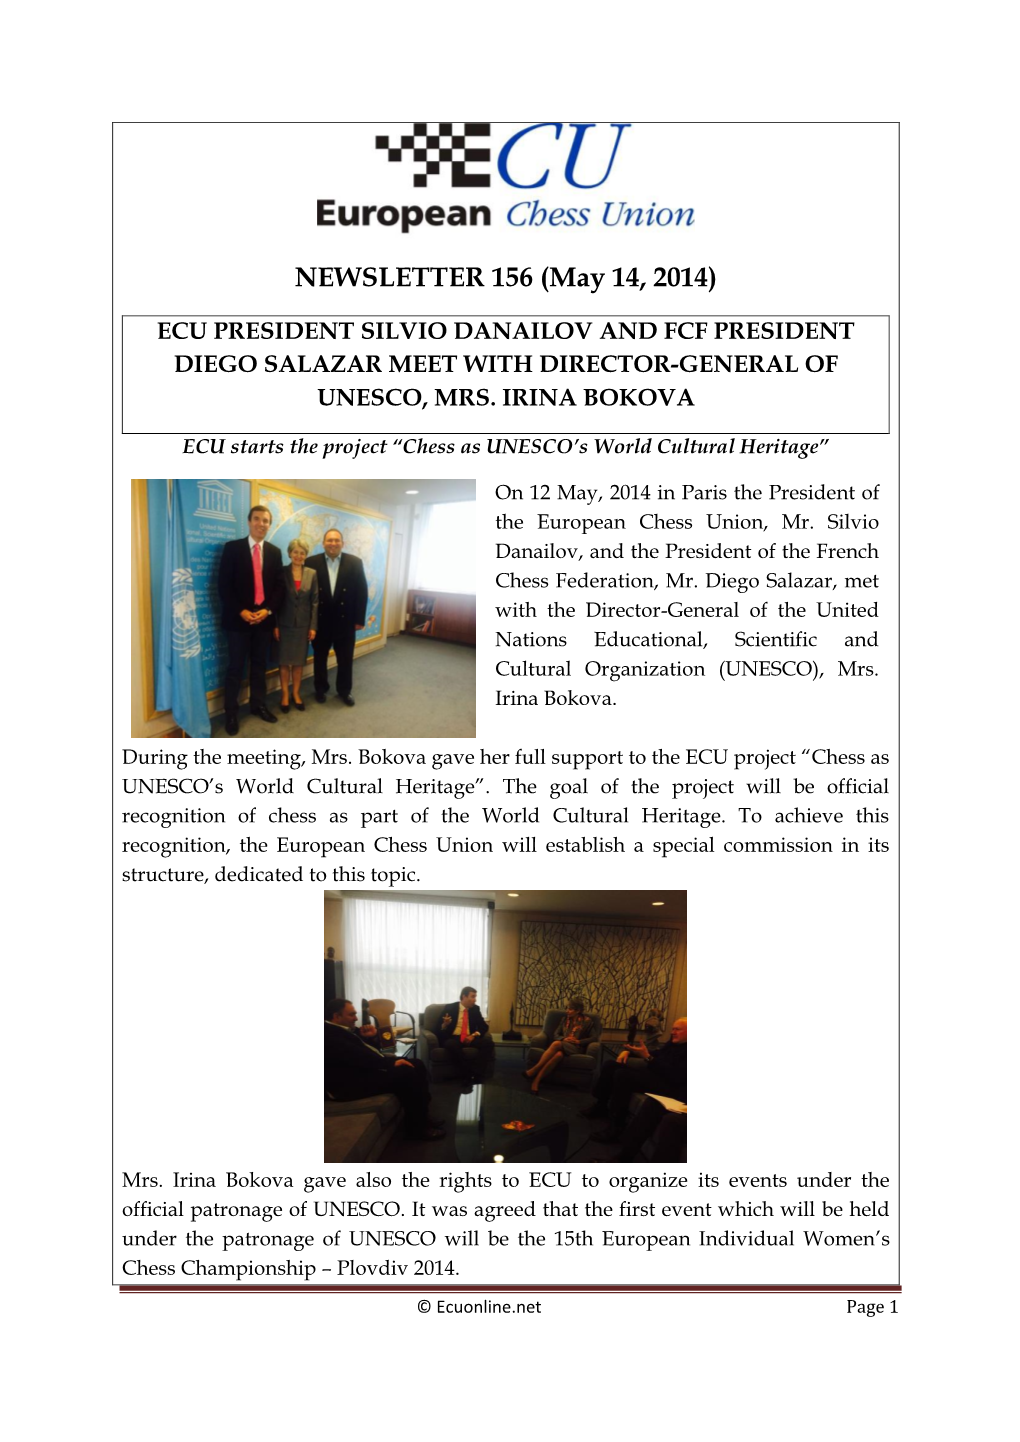 NEWSLETTER 156 (May 14, 2014)